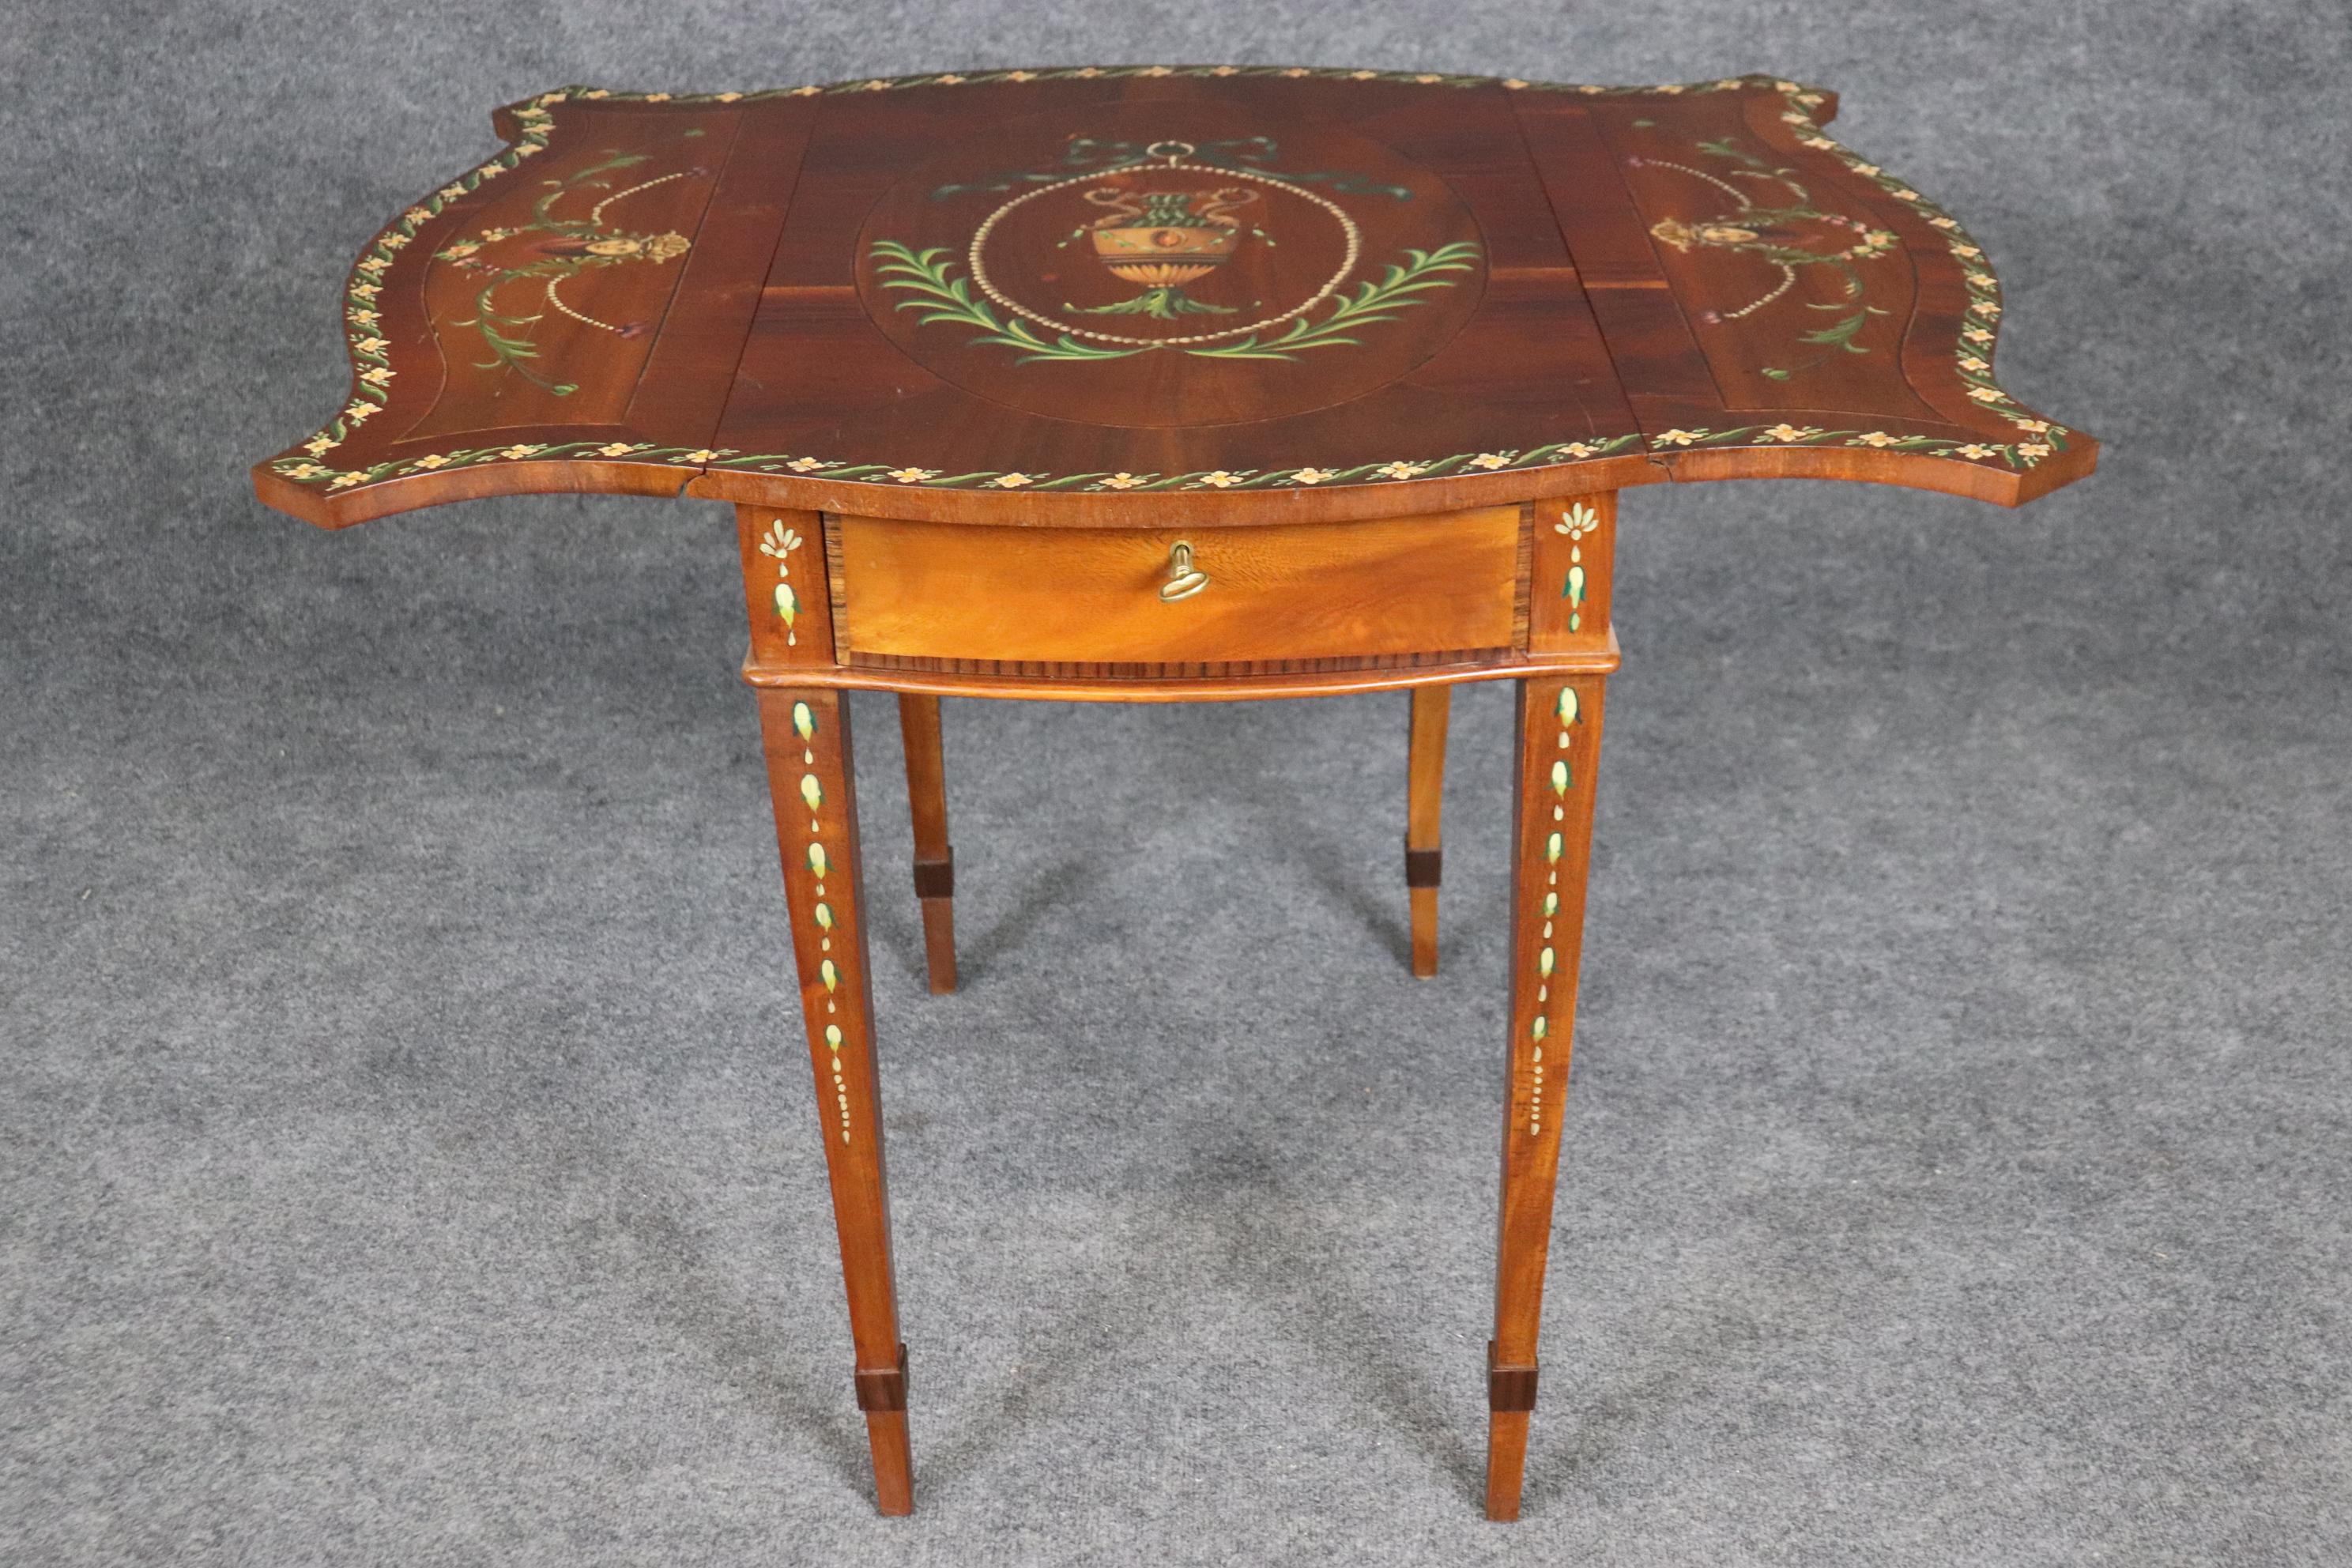 Rare Adams Paint Decorated English Pembroke Table Circa 1920 For Sale 3